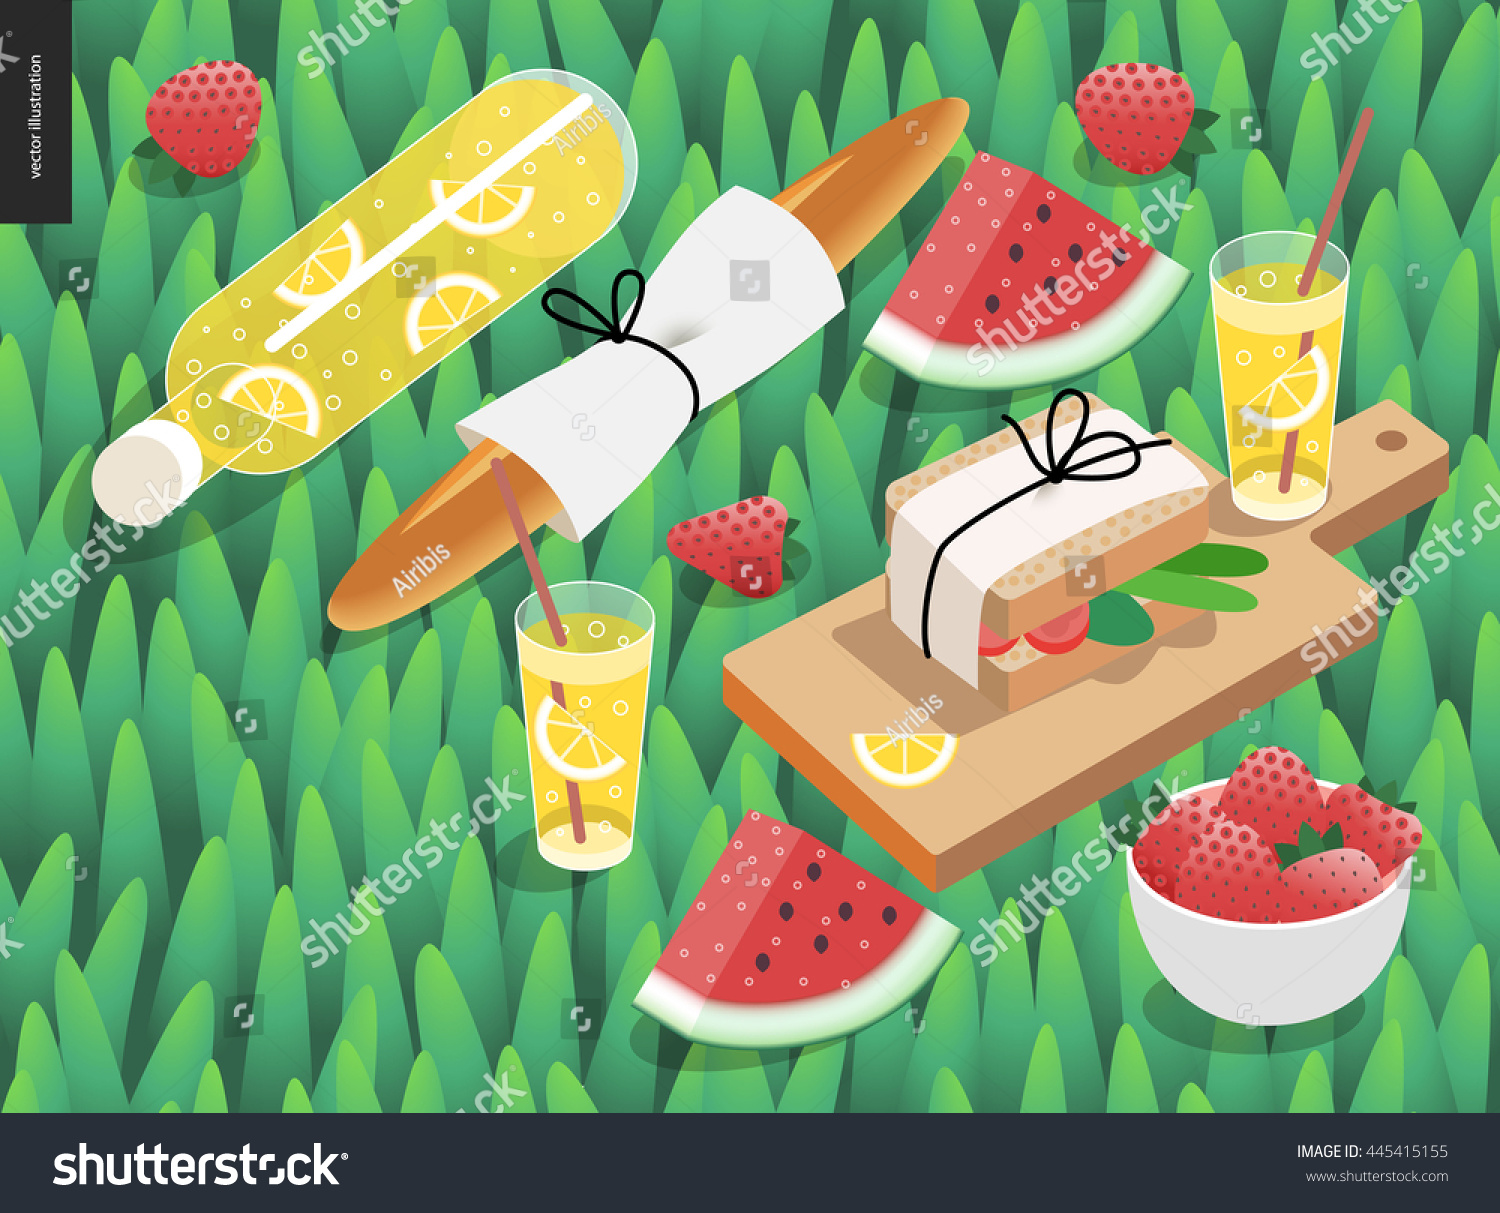 SVG of Picnic snack and grass template - vector cartoon flat illustration of snack and drink for picnic - bottle and glass of lemonade, baguette, watermelon, sandwich, on a green grass background svg